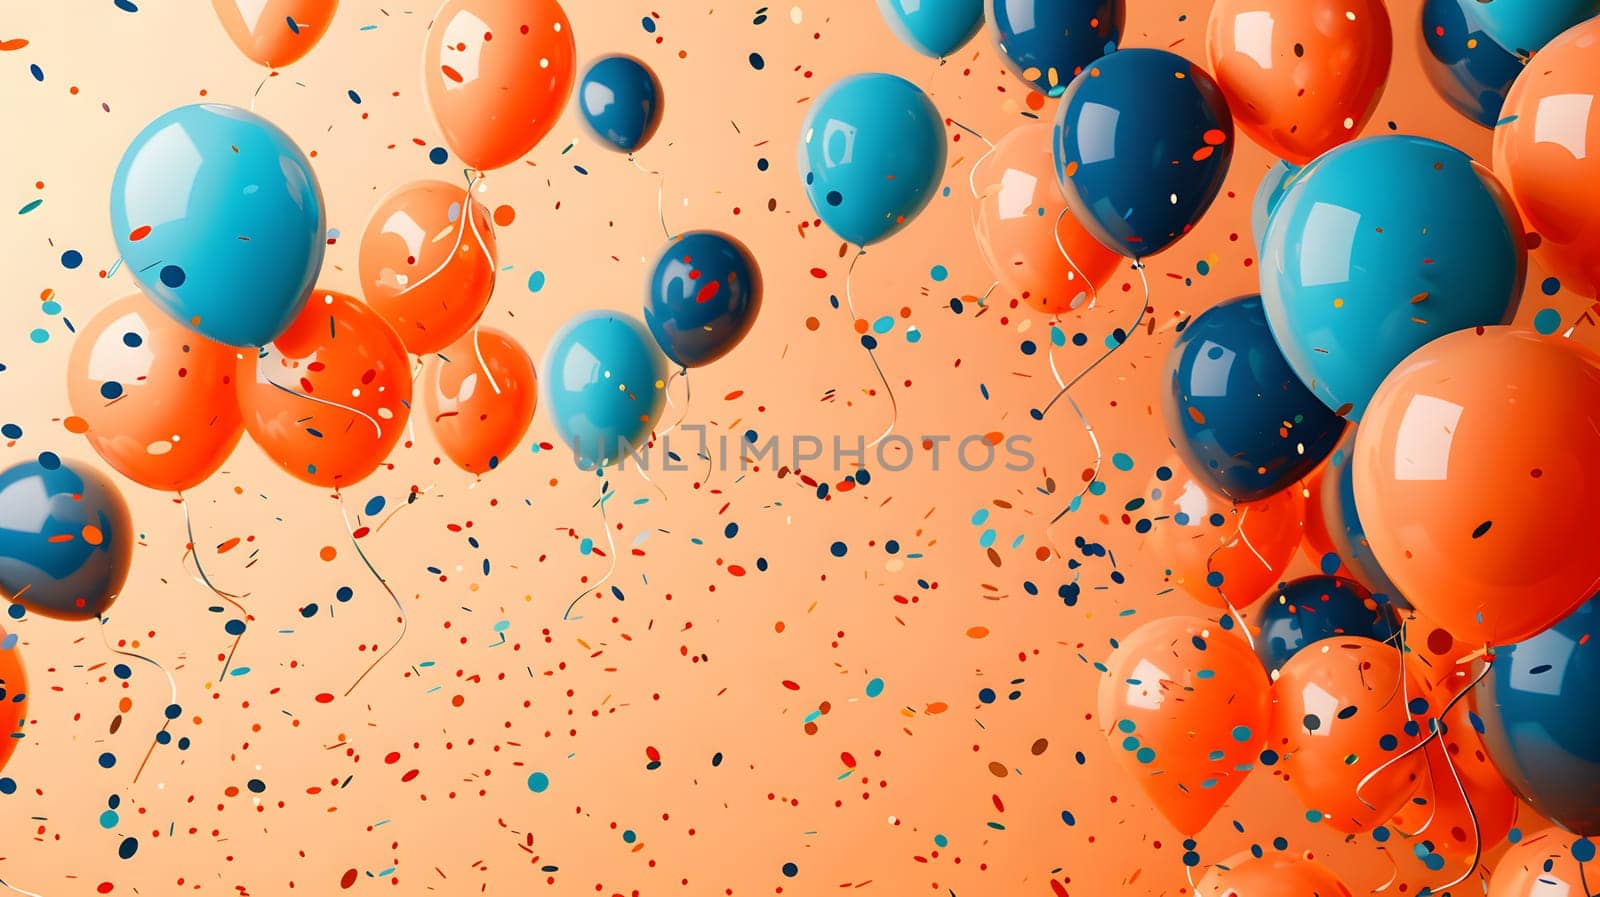 Vivid orange and electric blue balloons float among confetti by Nadtochiy